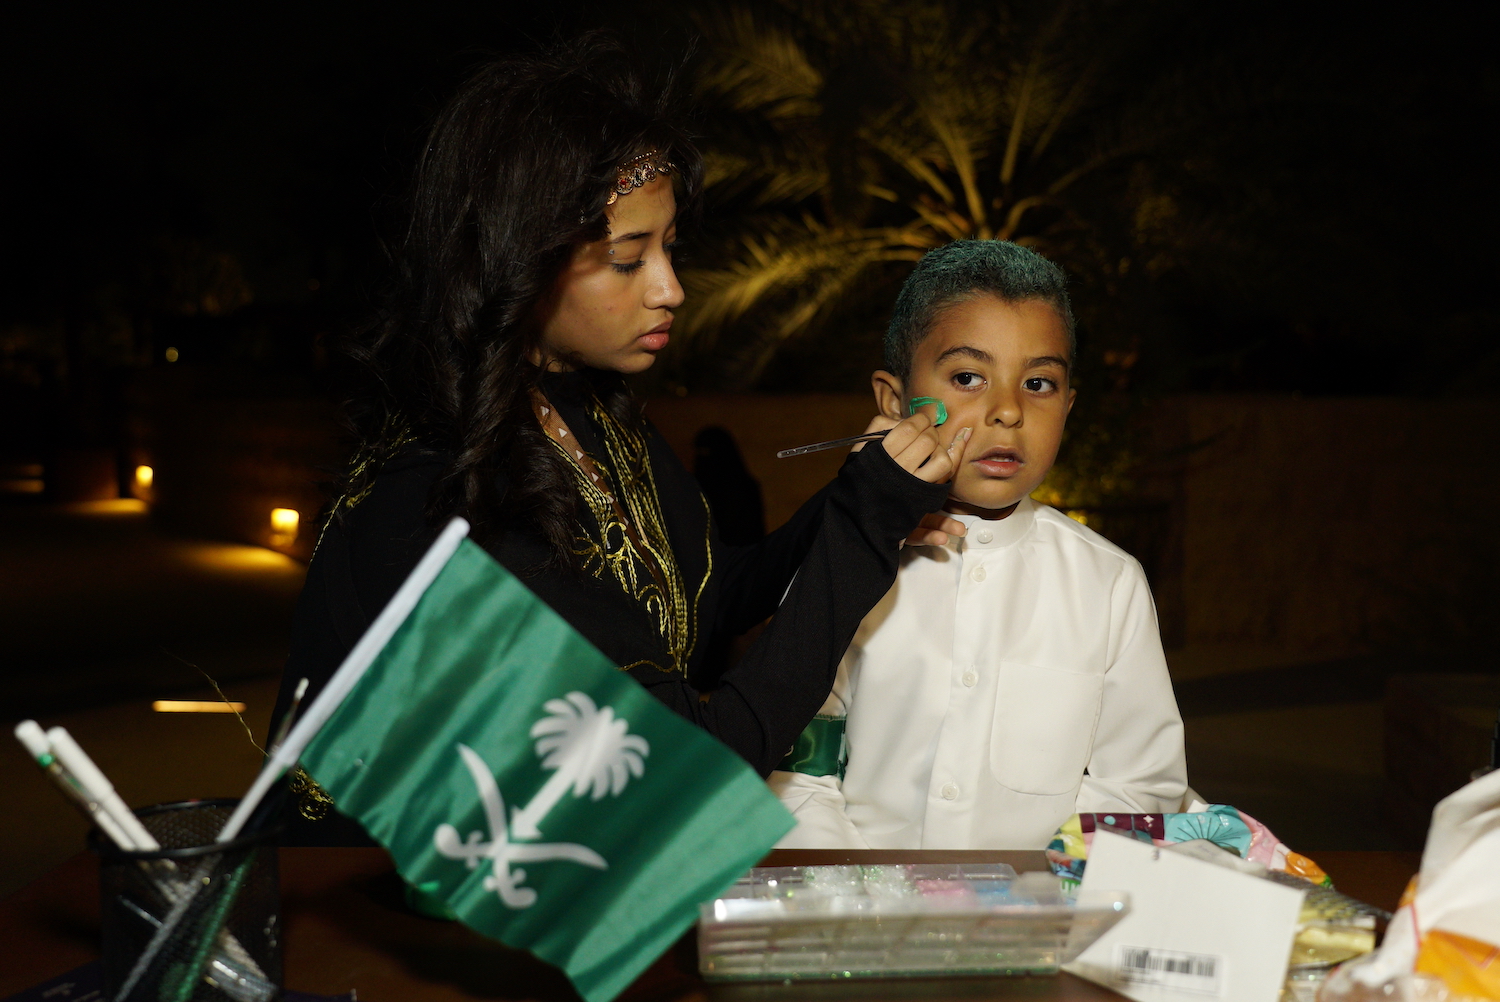 Saudi Arabia’s green flag was hoisted all over the Kingdom in a celebration of national identity and pride in the country’s history on Flag Day. (AN photo by Huda Bashatah)